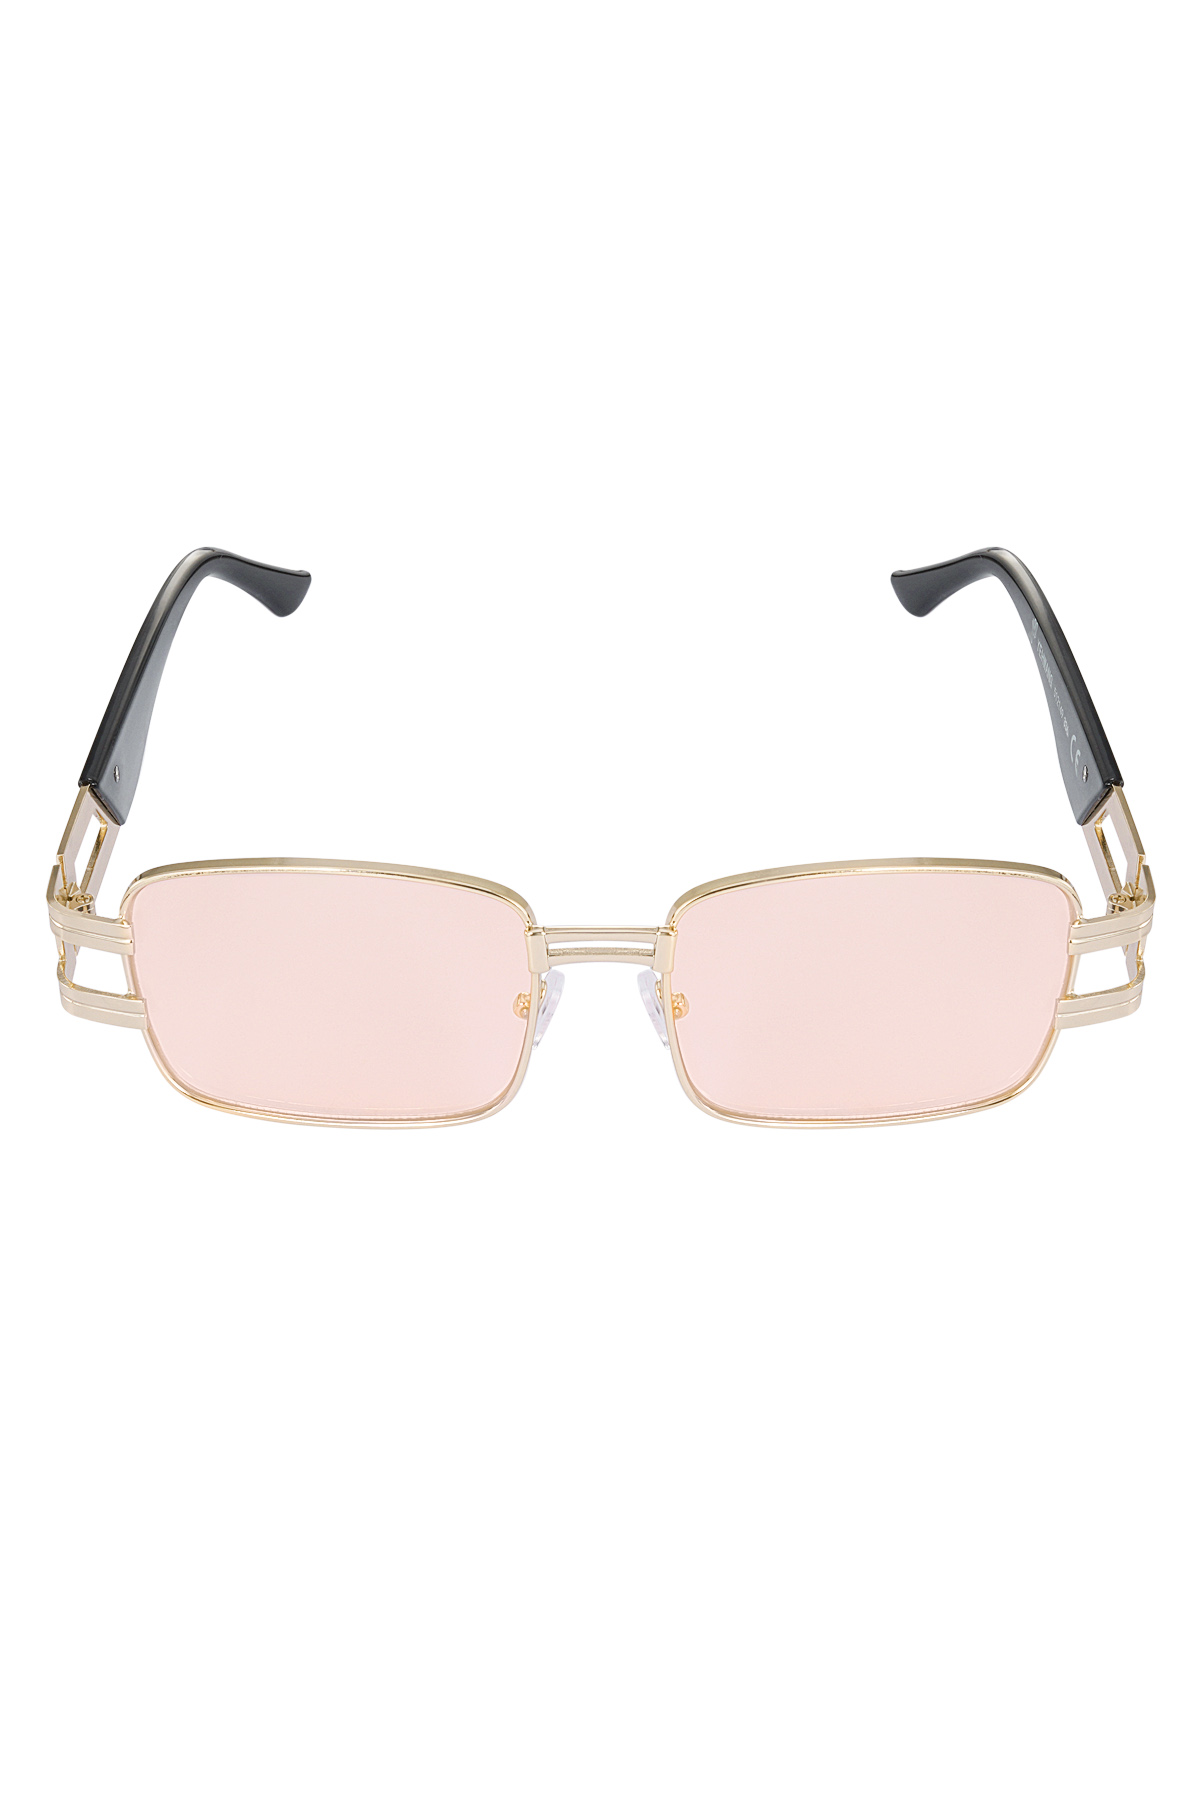 Sunglasses simple metal essential - pink gold Picture4